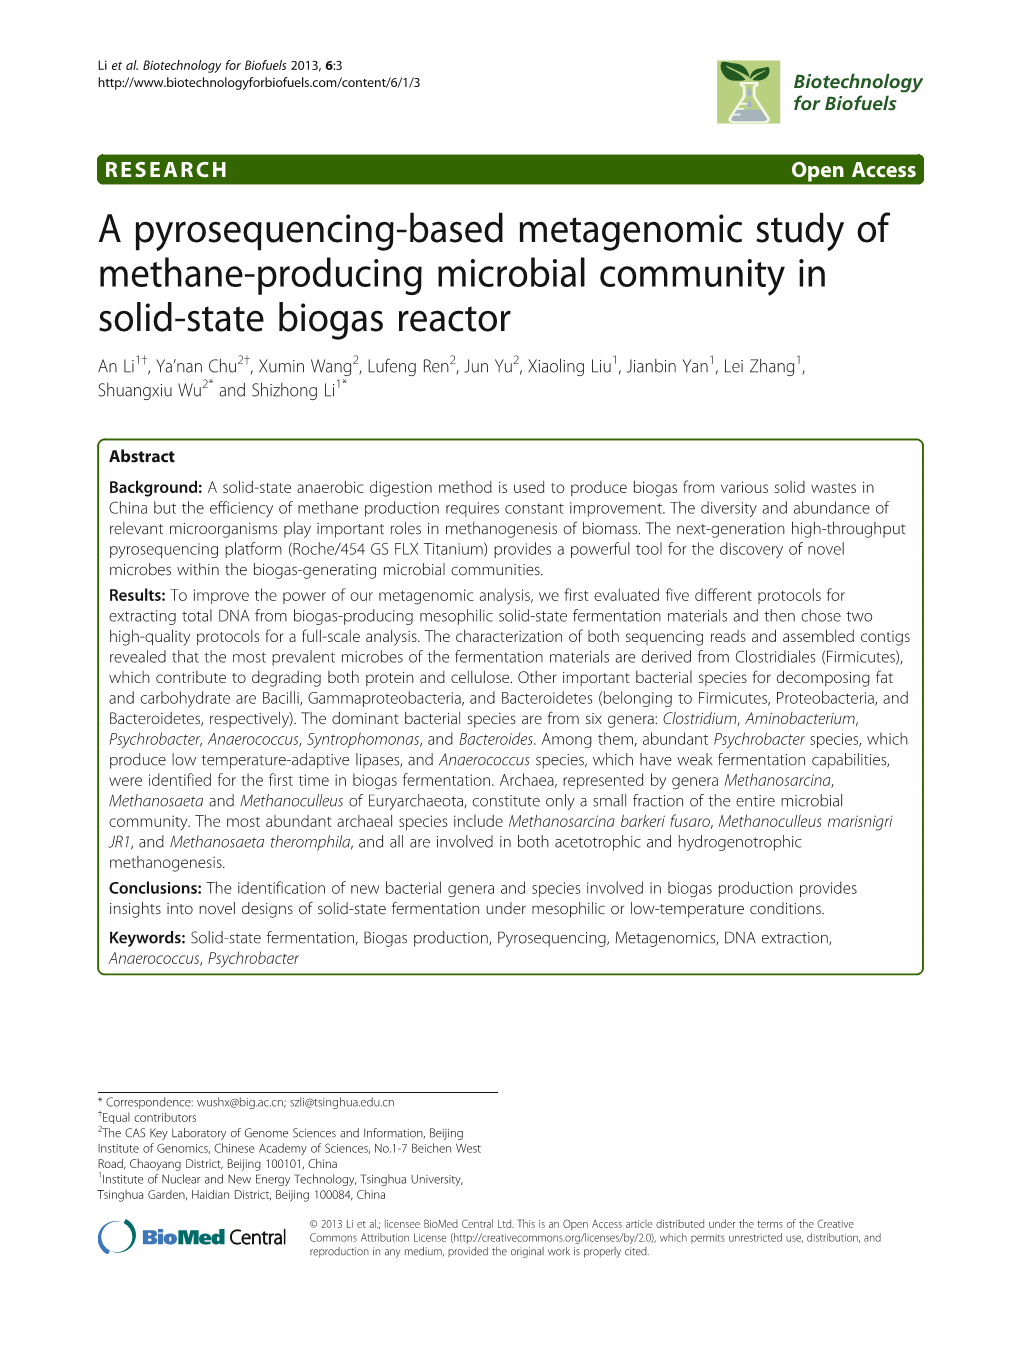 A Pyrosequencing-Based Metagenomic Study of Methane